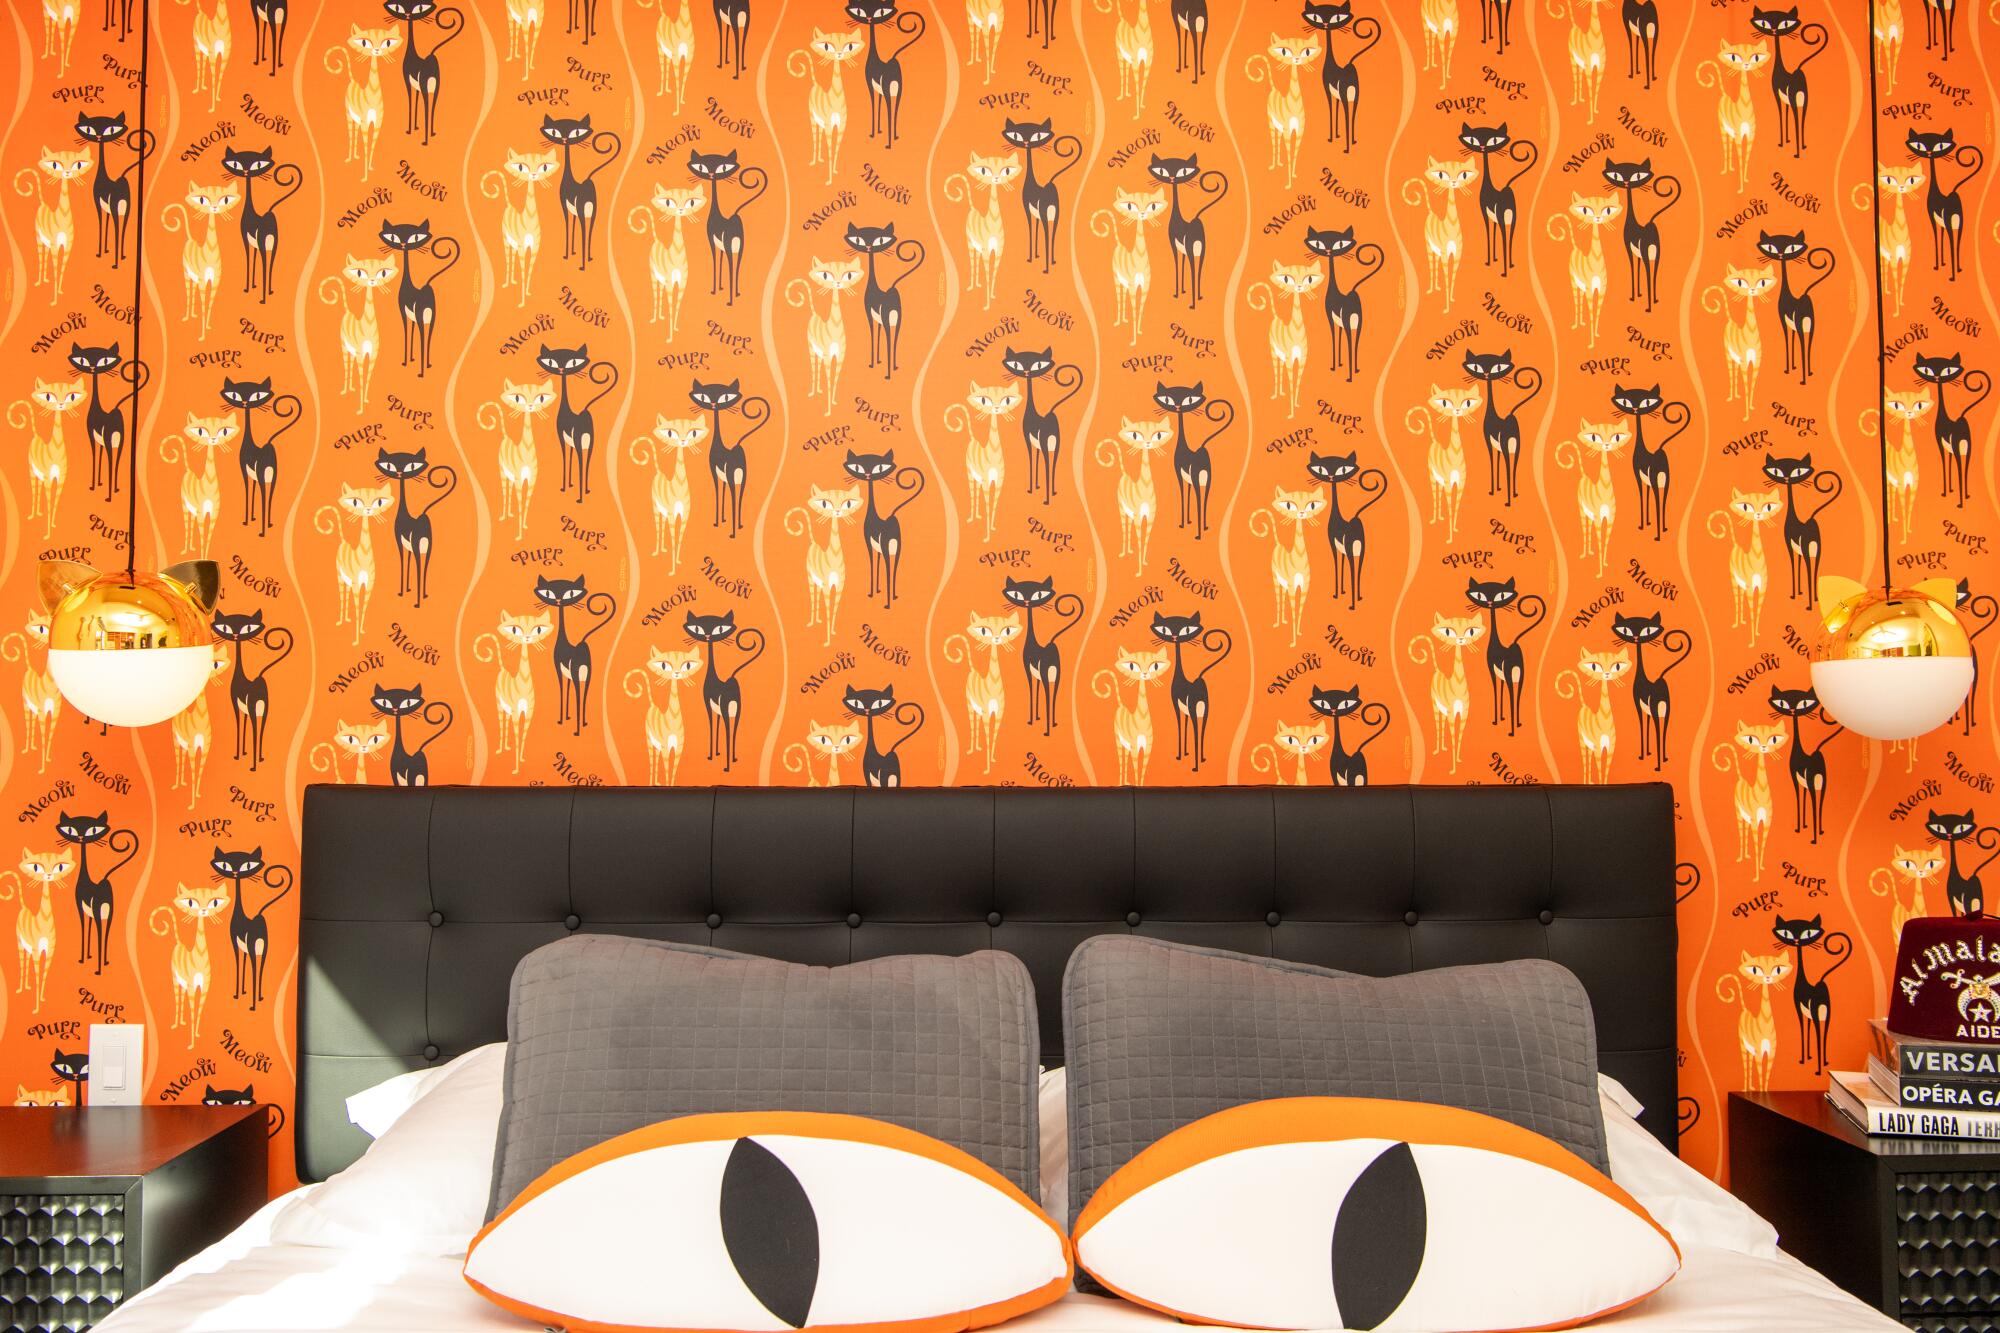 A cat-themed bedroom in the Shag House has cats on the wallpaper and cat's-eye-shaped pillows on the bed.